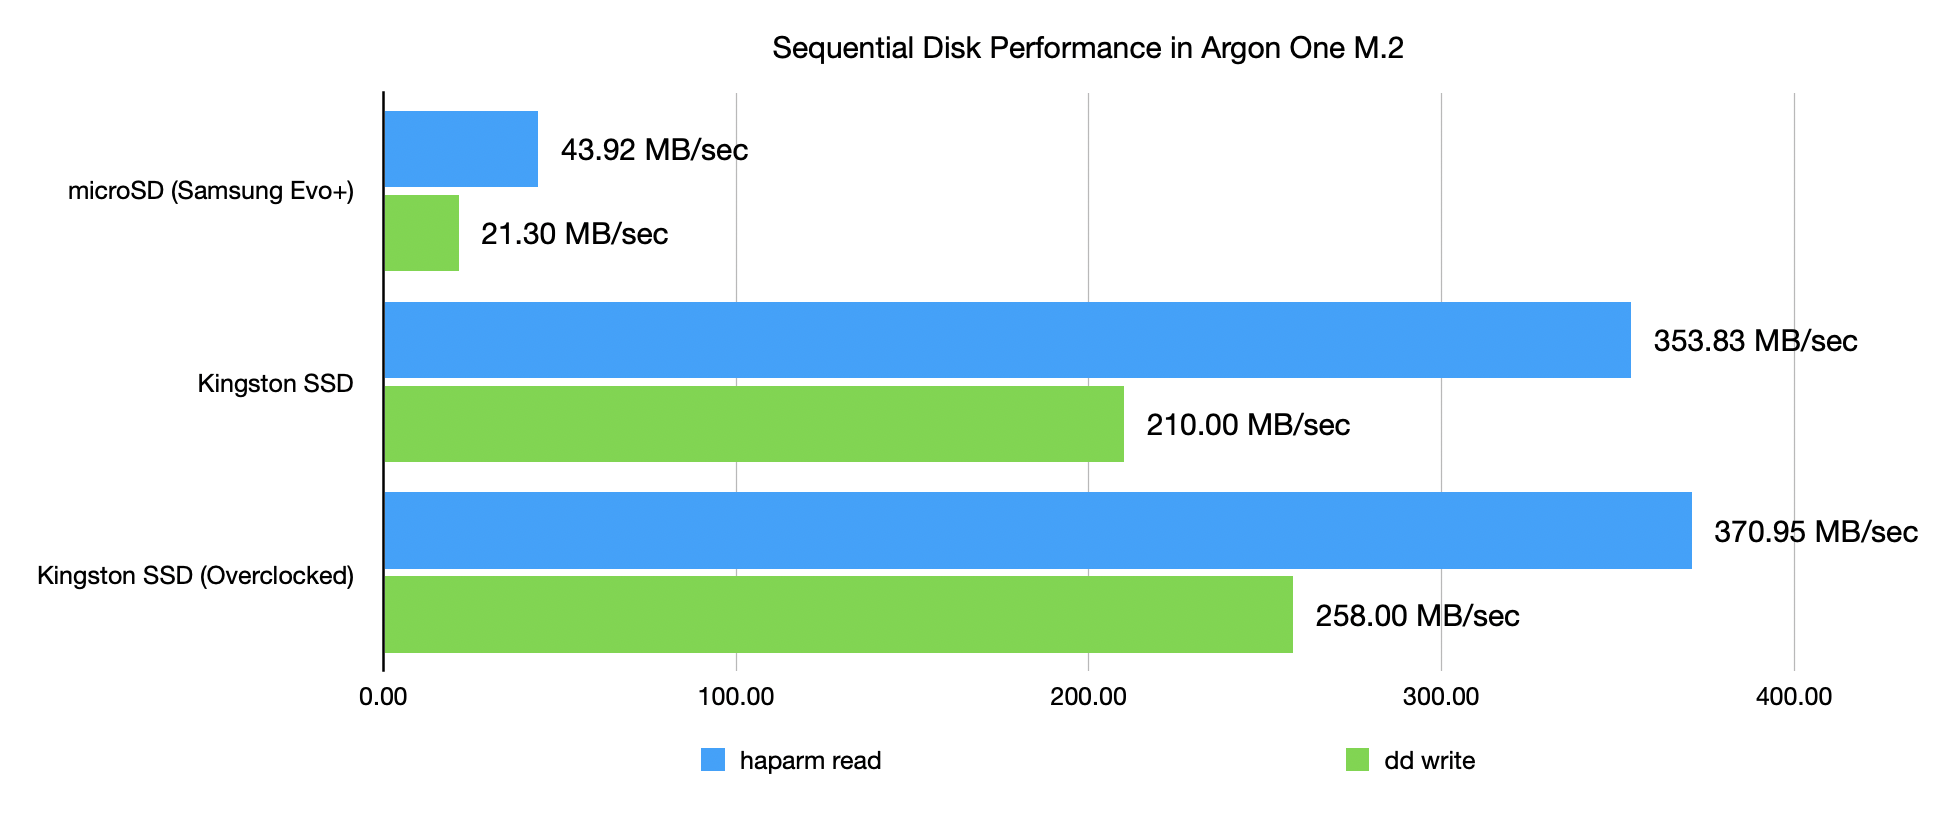 Argon One M.2 SSD vs microSD performance - sequential